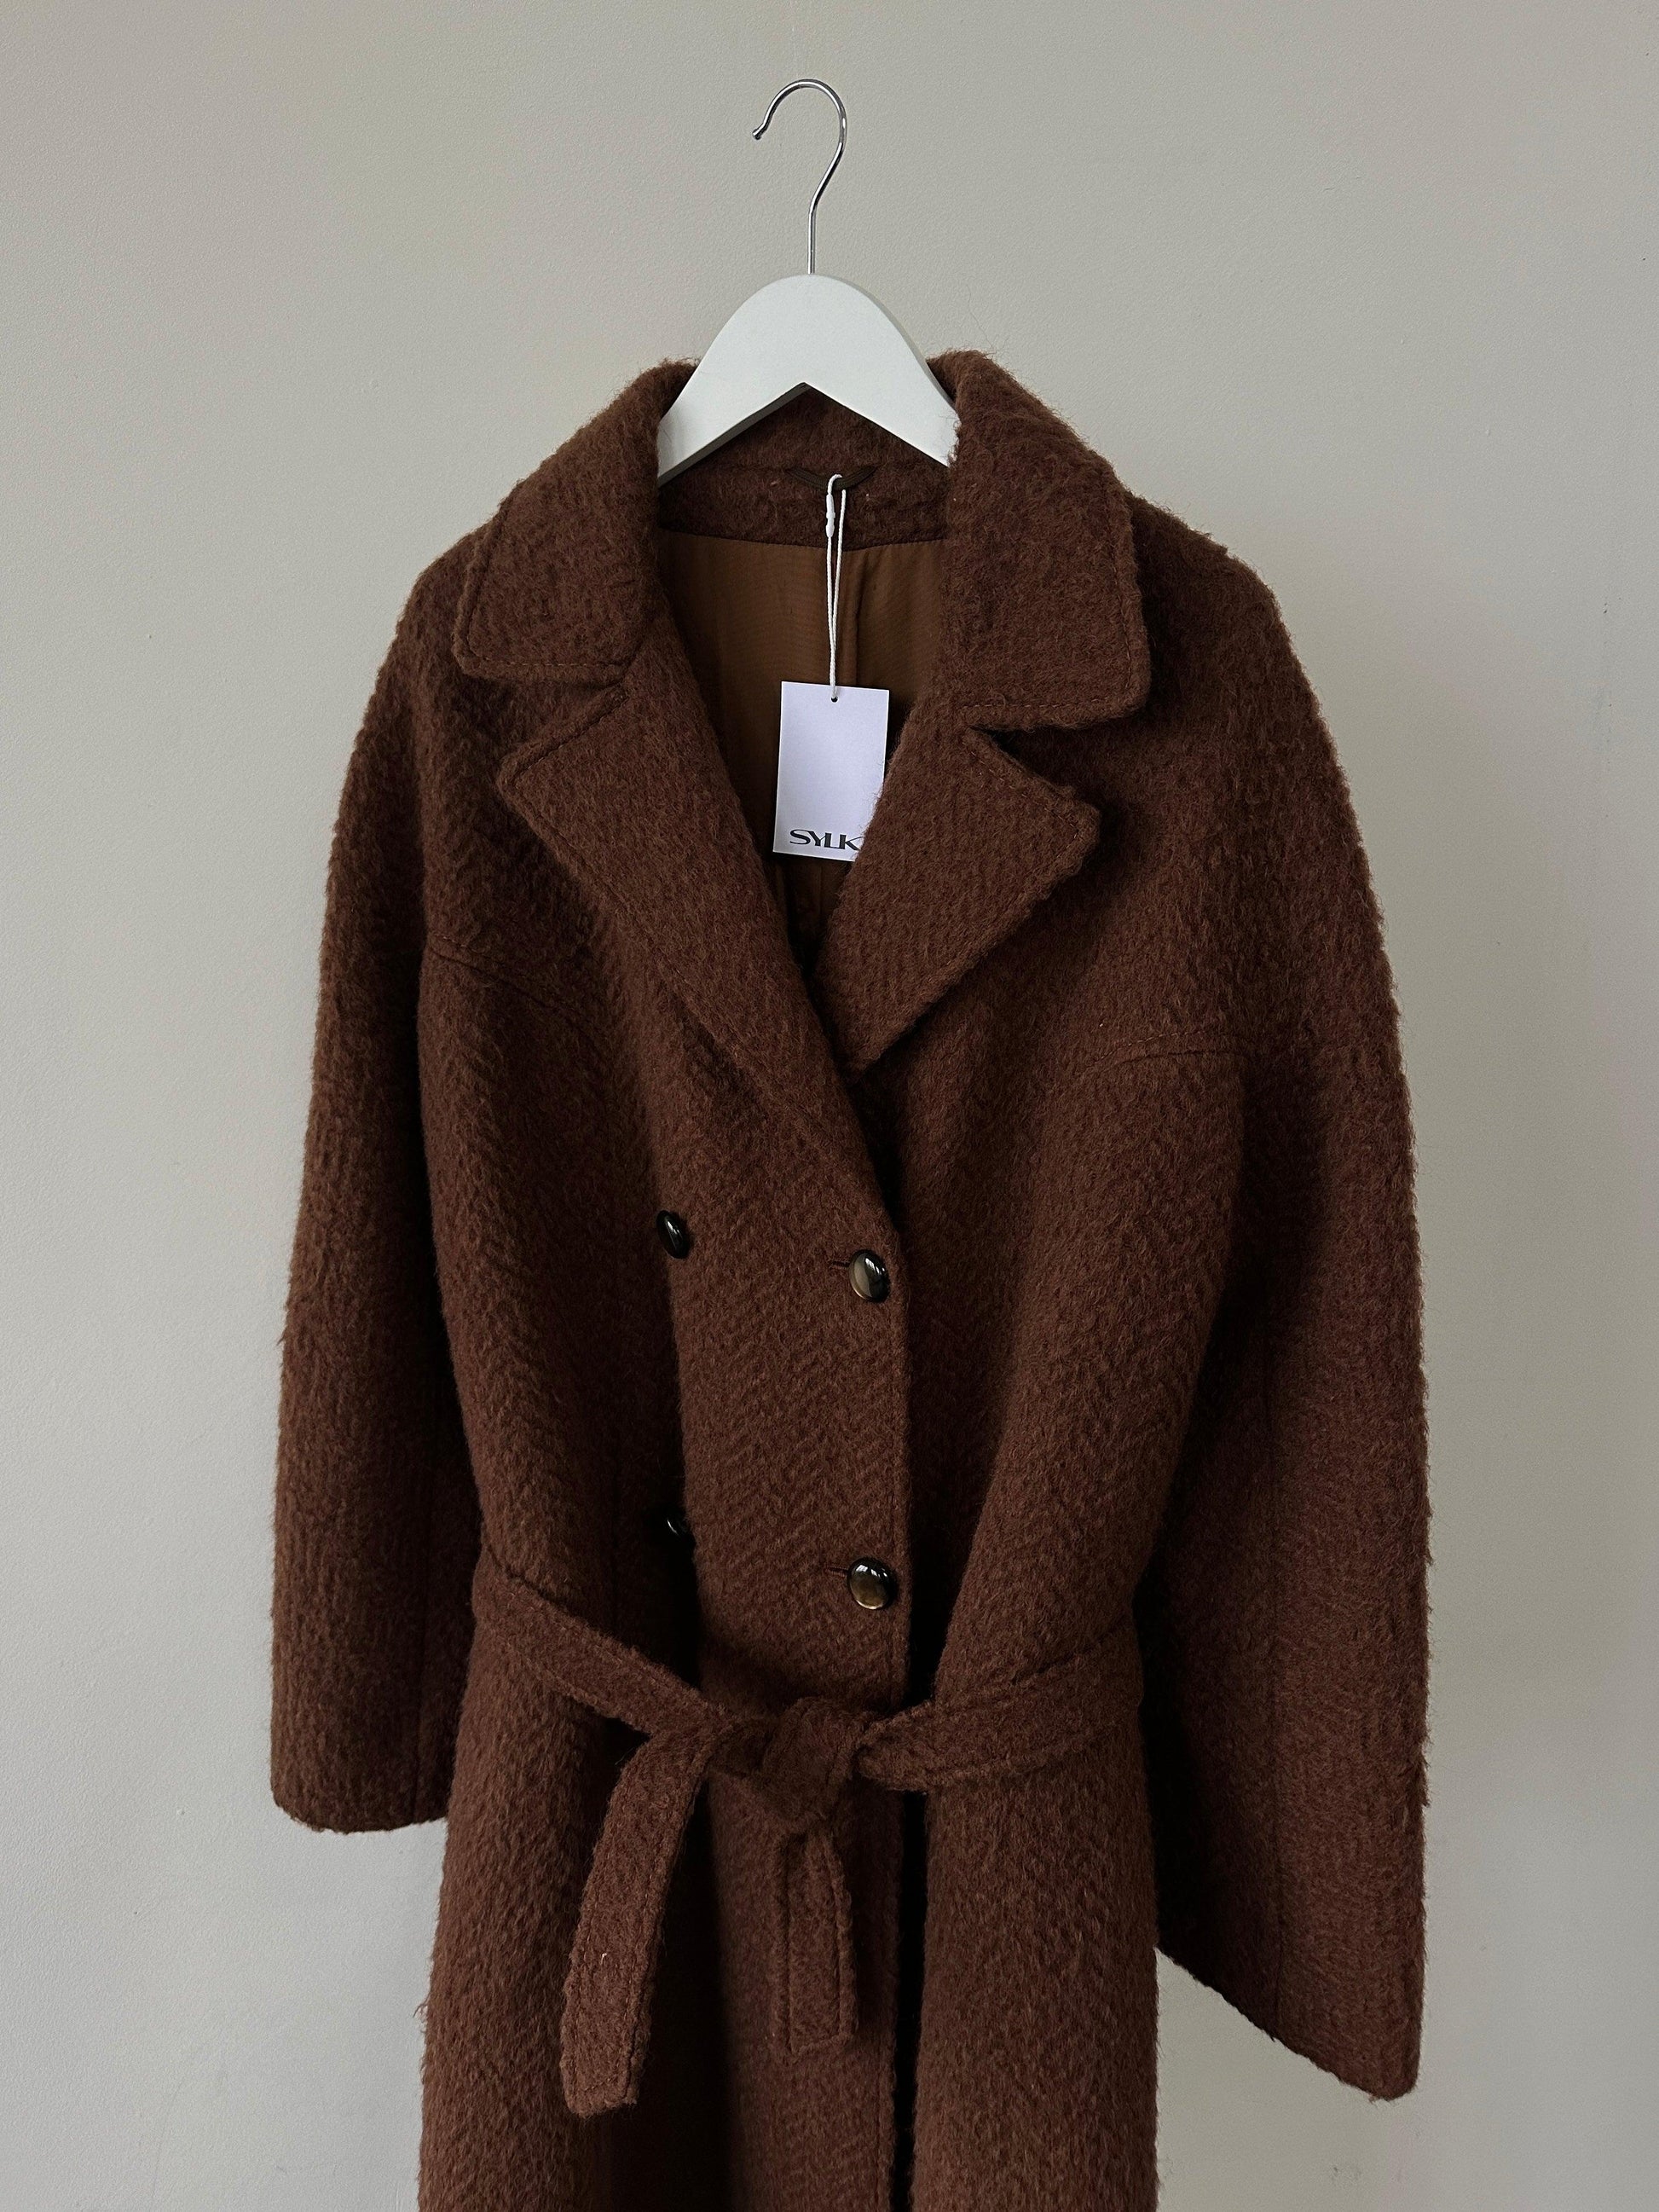 Italian Vintage Mohair Wool Double Breasted Belted Coat - S/M - Known Source